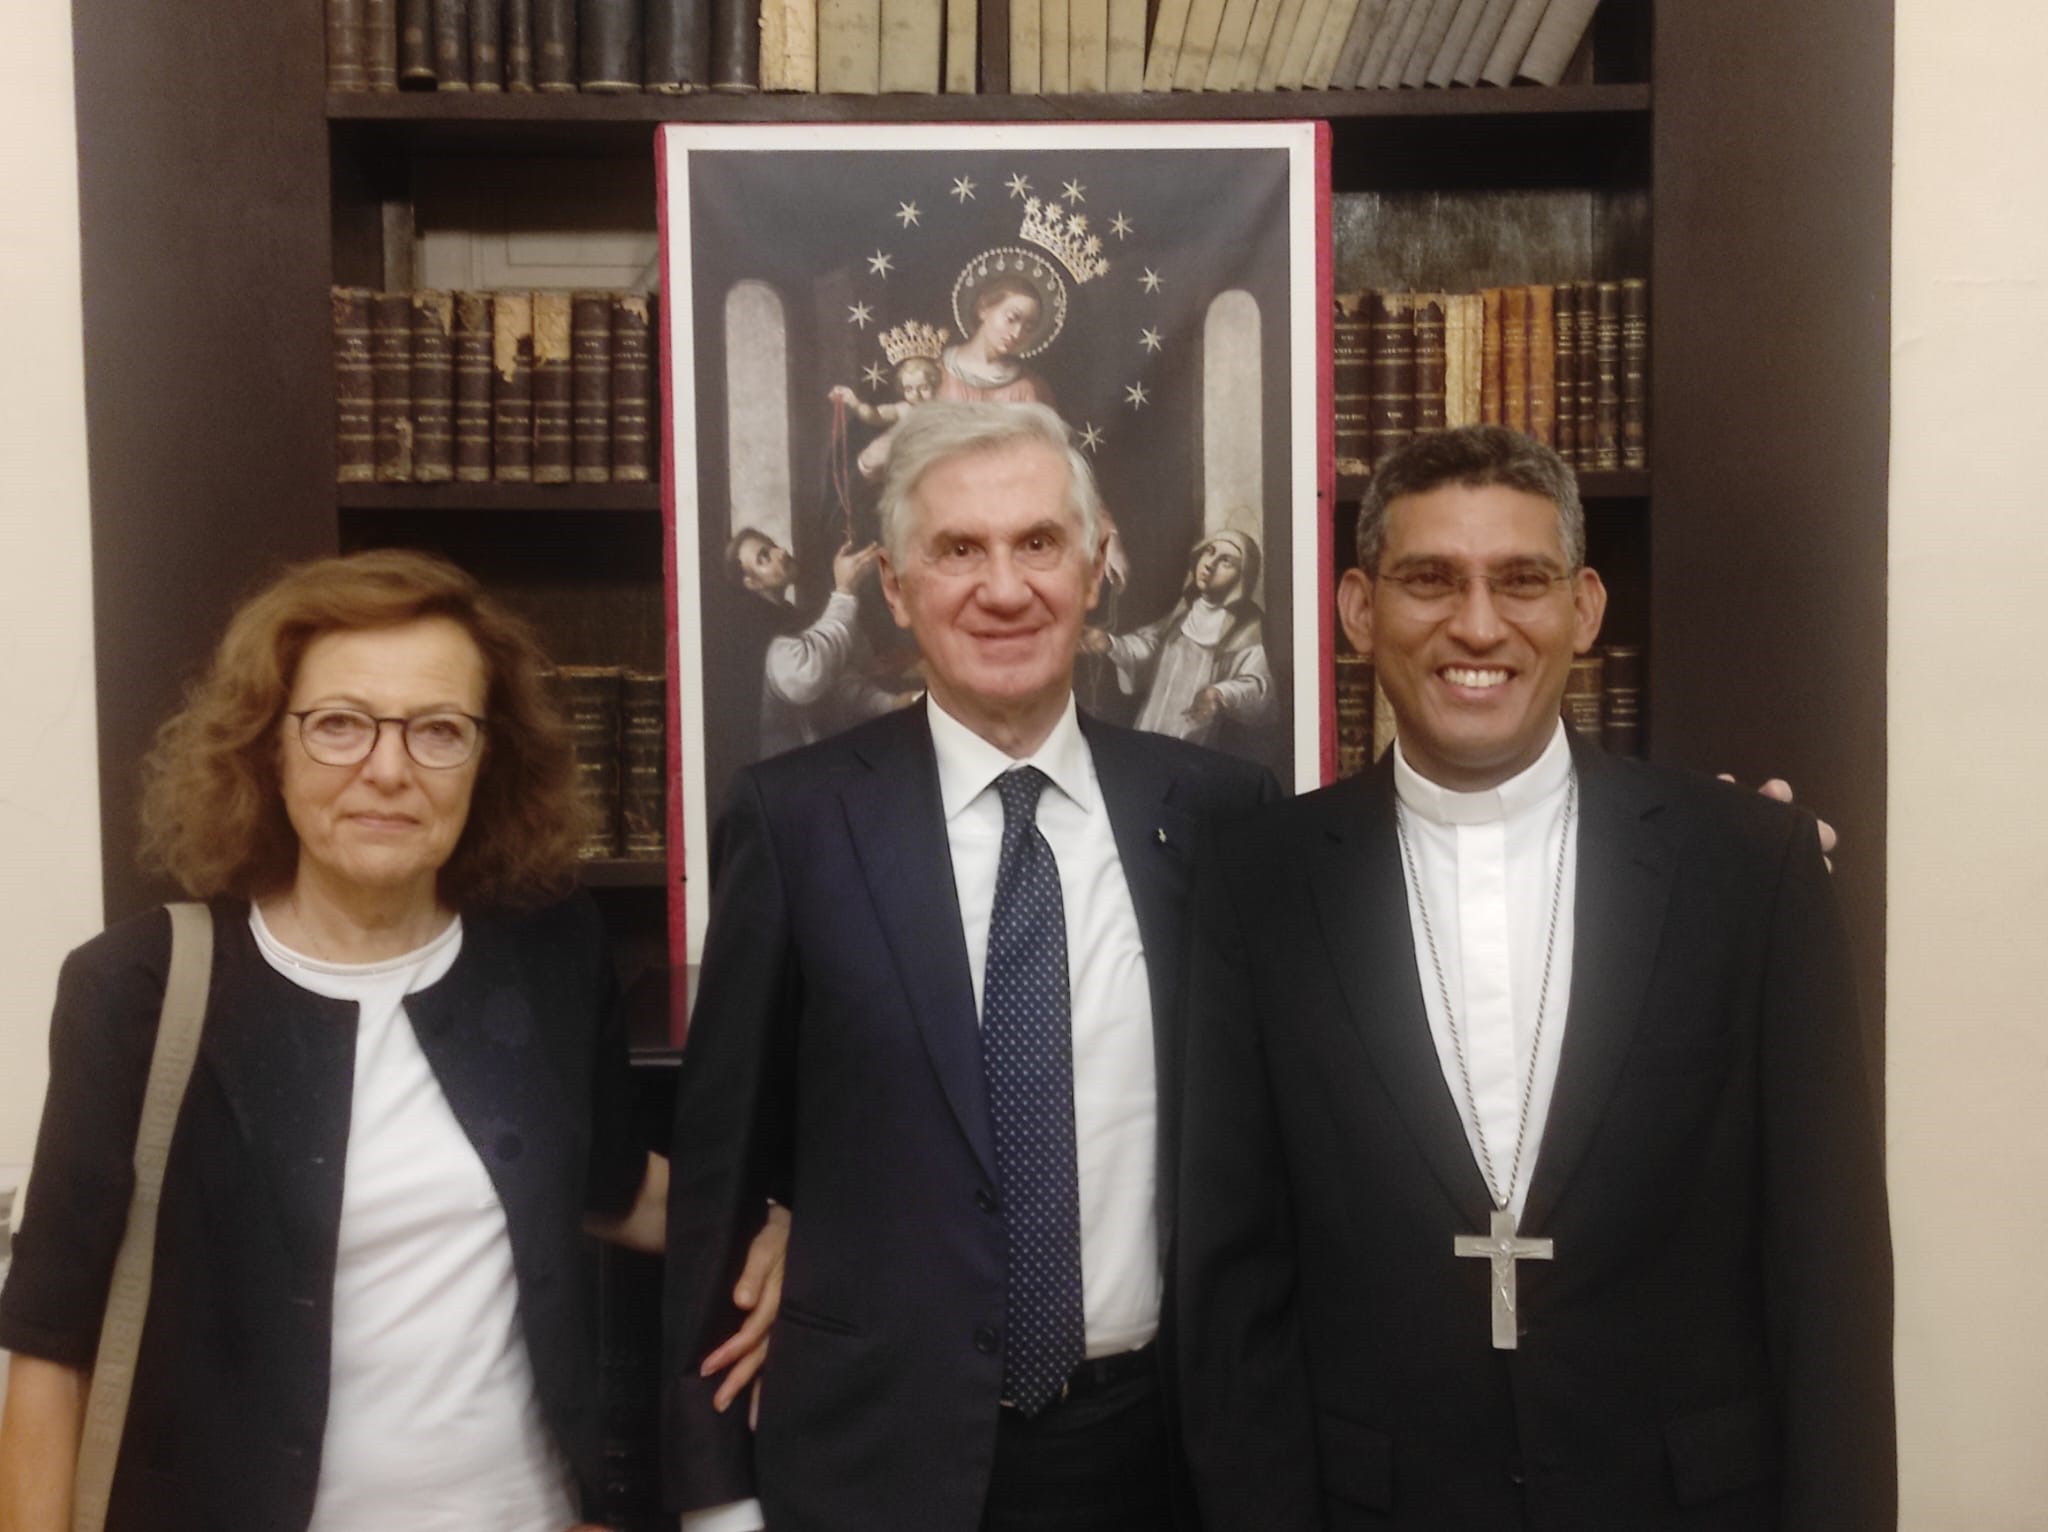 Ambassador meets with the Auxiliary Bishop of the Archdiocese of Havana